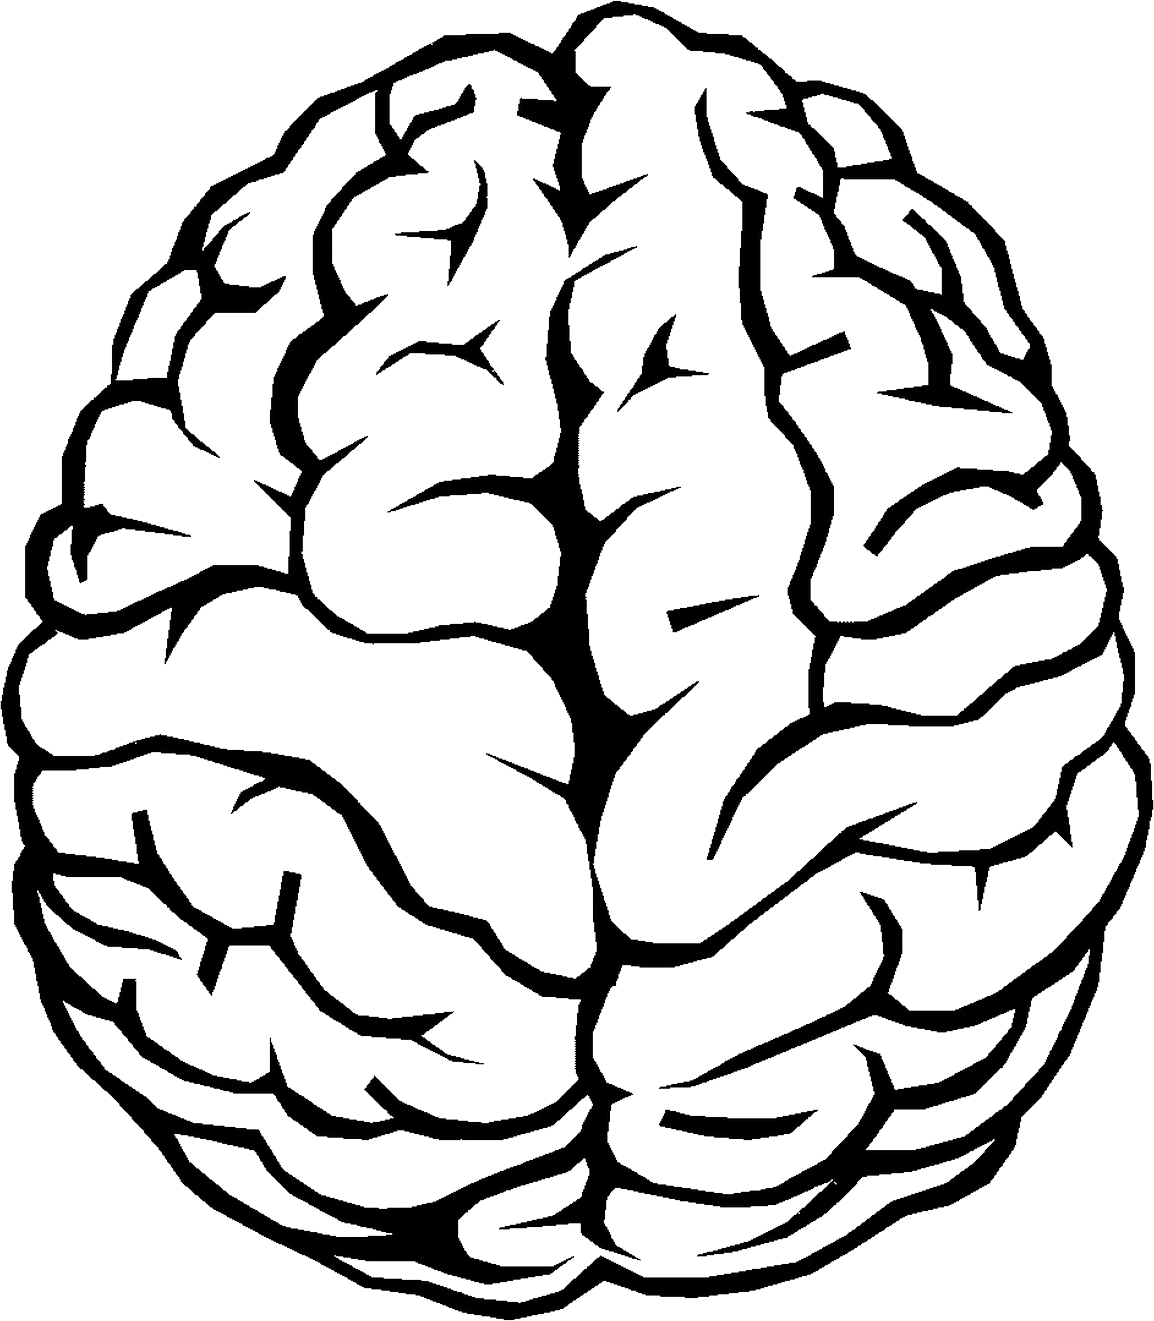 Brain Outline PNG Image PurePNG Free transparent CC0 PNG Image Library